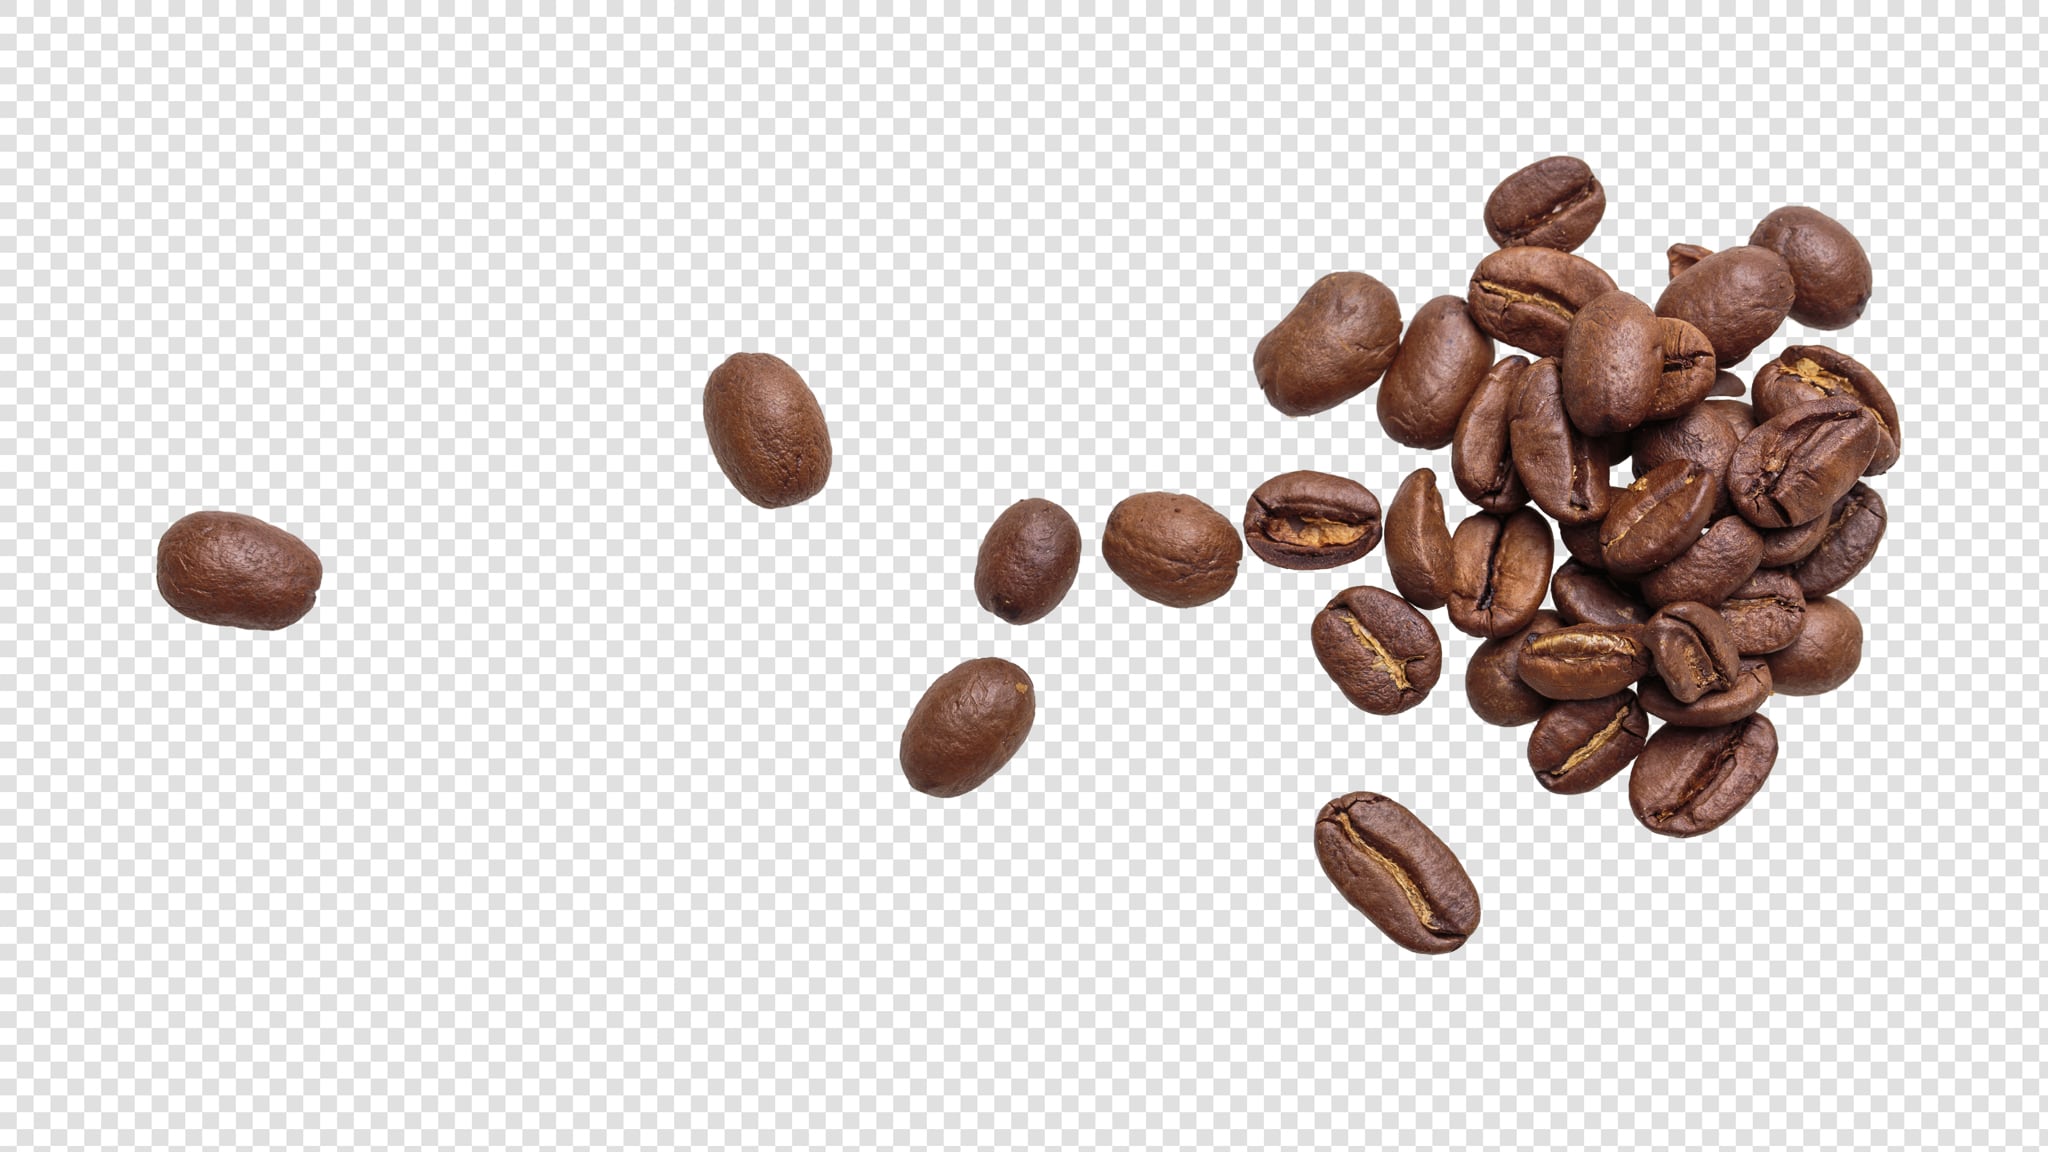 Coffee image asset with transparent background